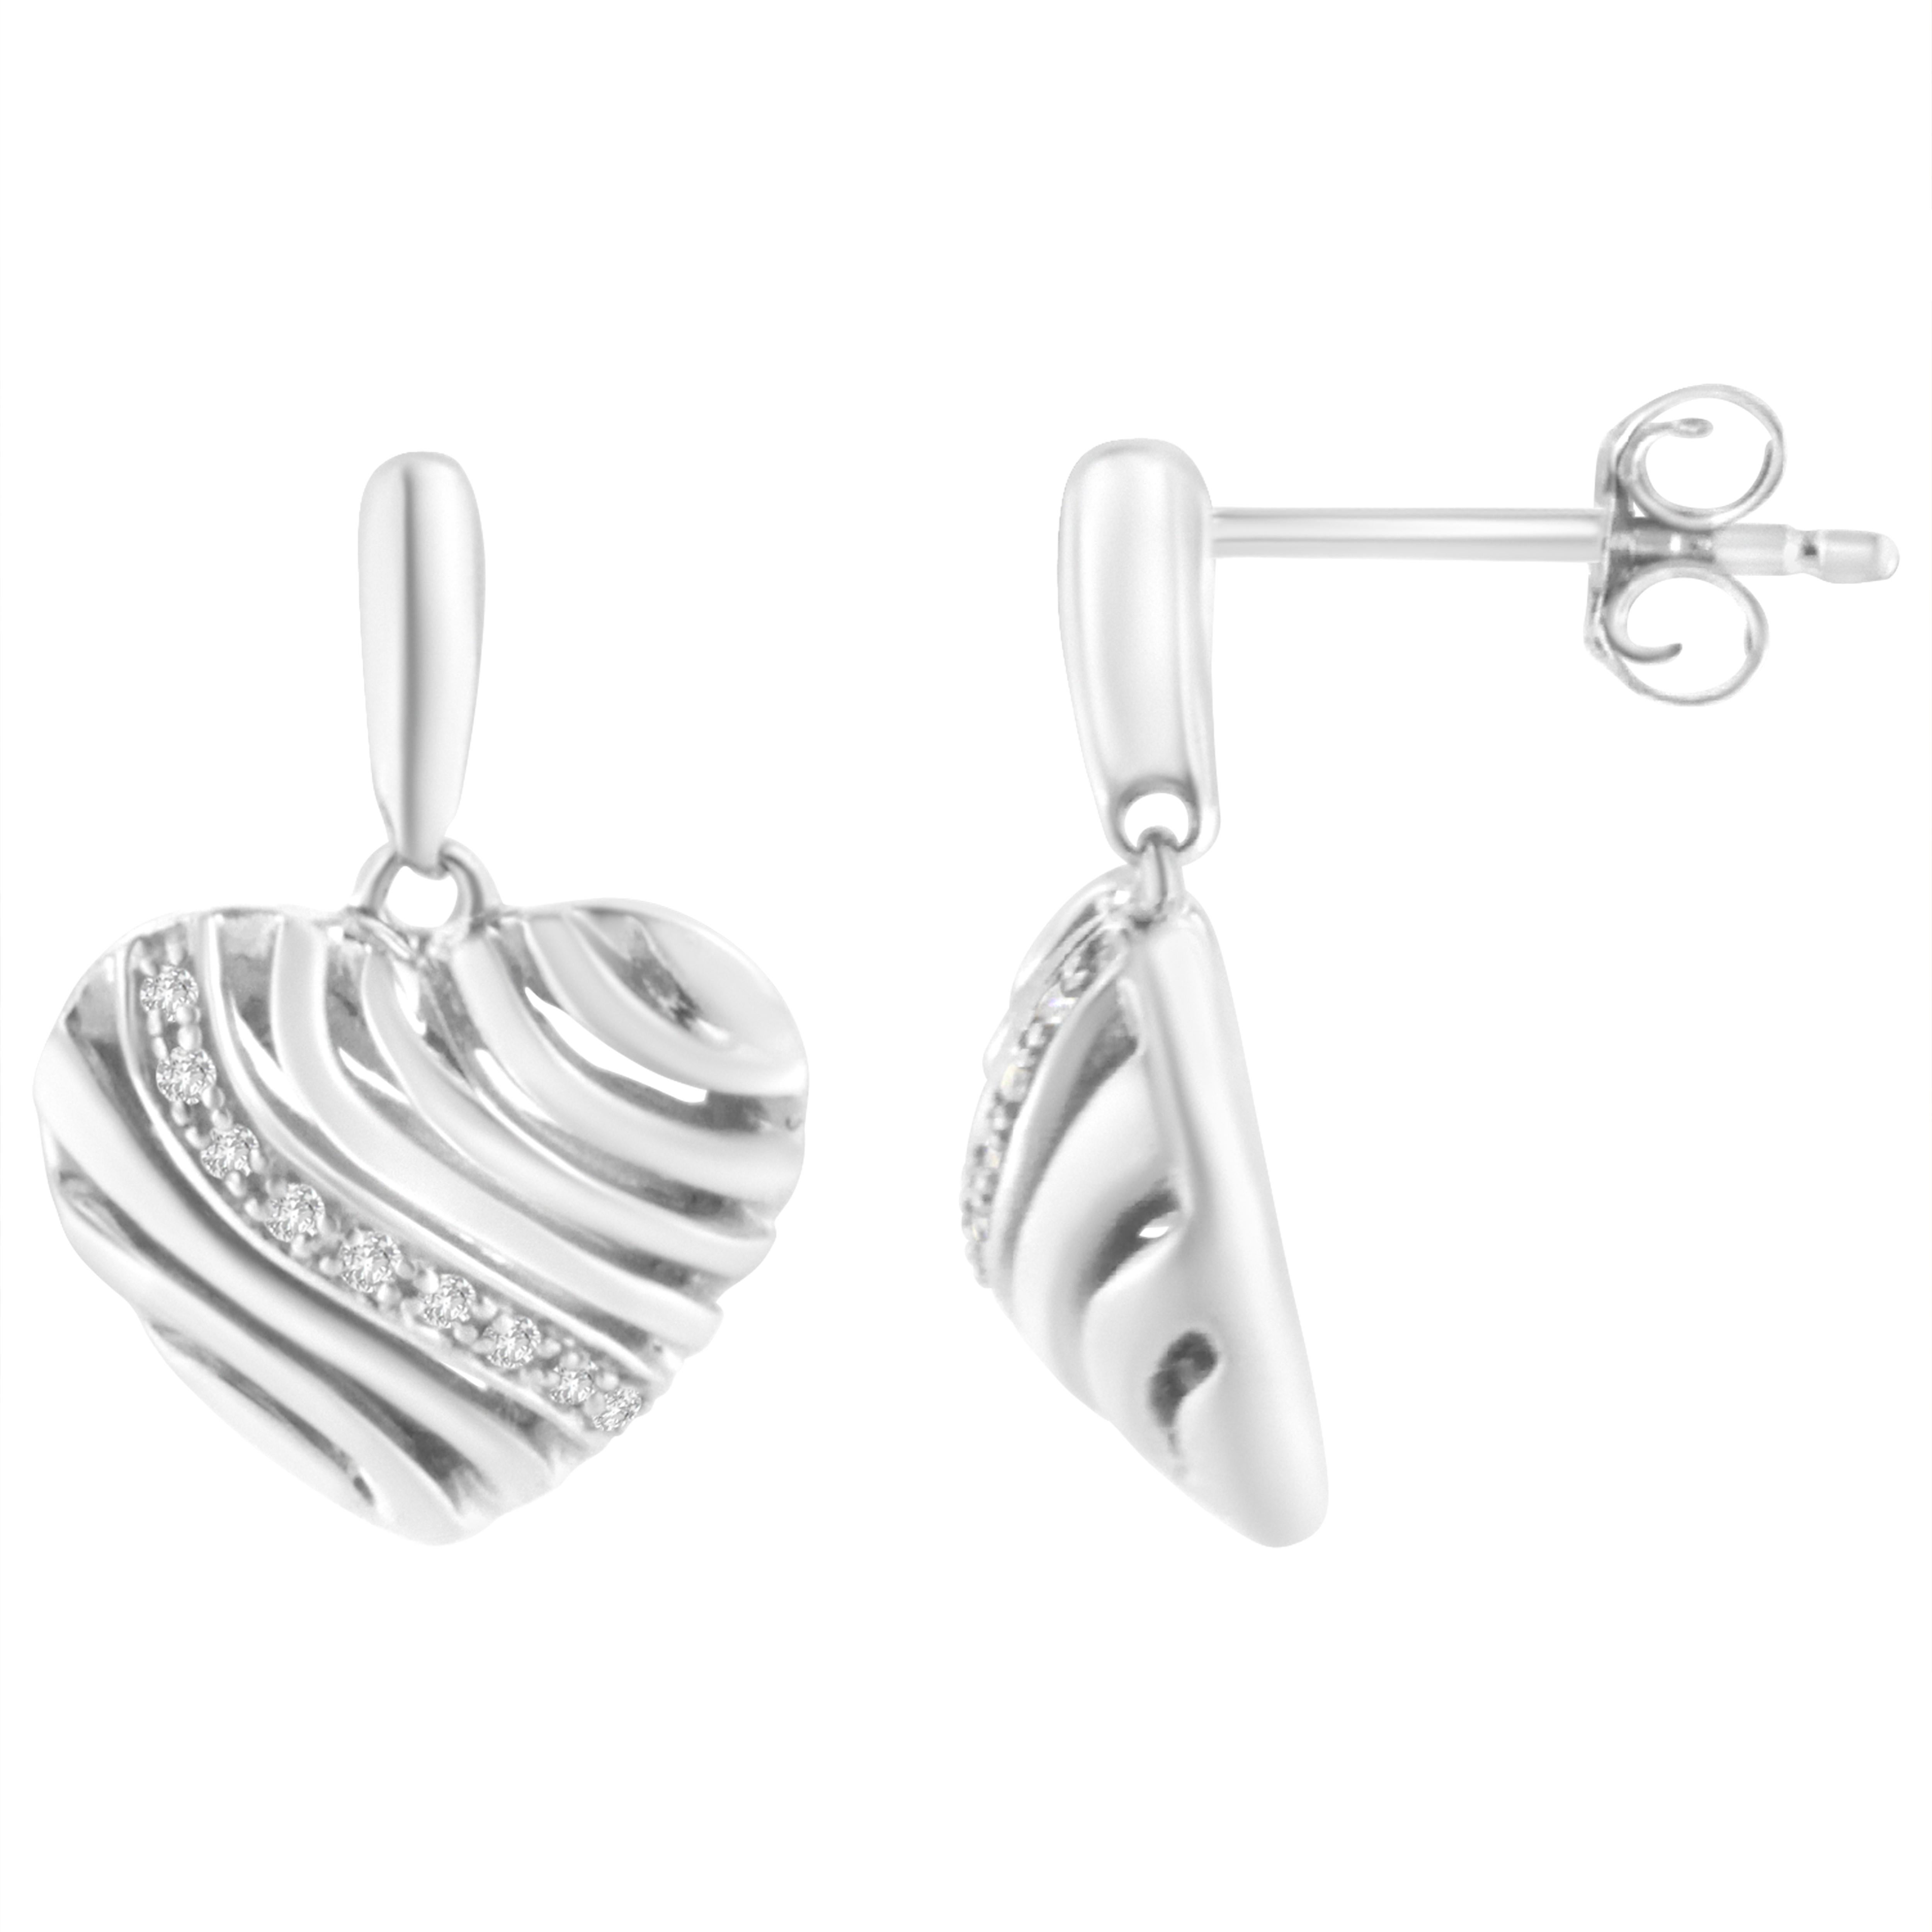 Steal her heart with these chic diamond puff earrings. Fashioned in glowing sterling silver these heart shape puff designed earrings features an array of sparkling 18 pave set single cut diamonds nestled among the gently curves of sterling silver.